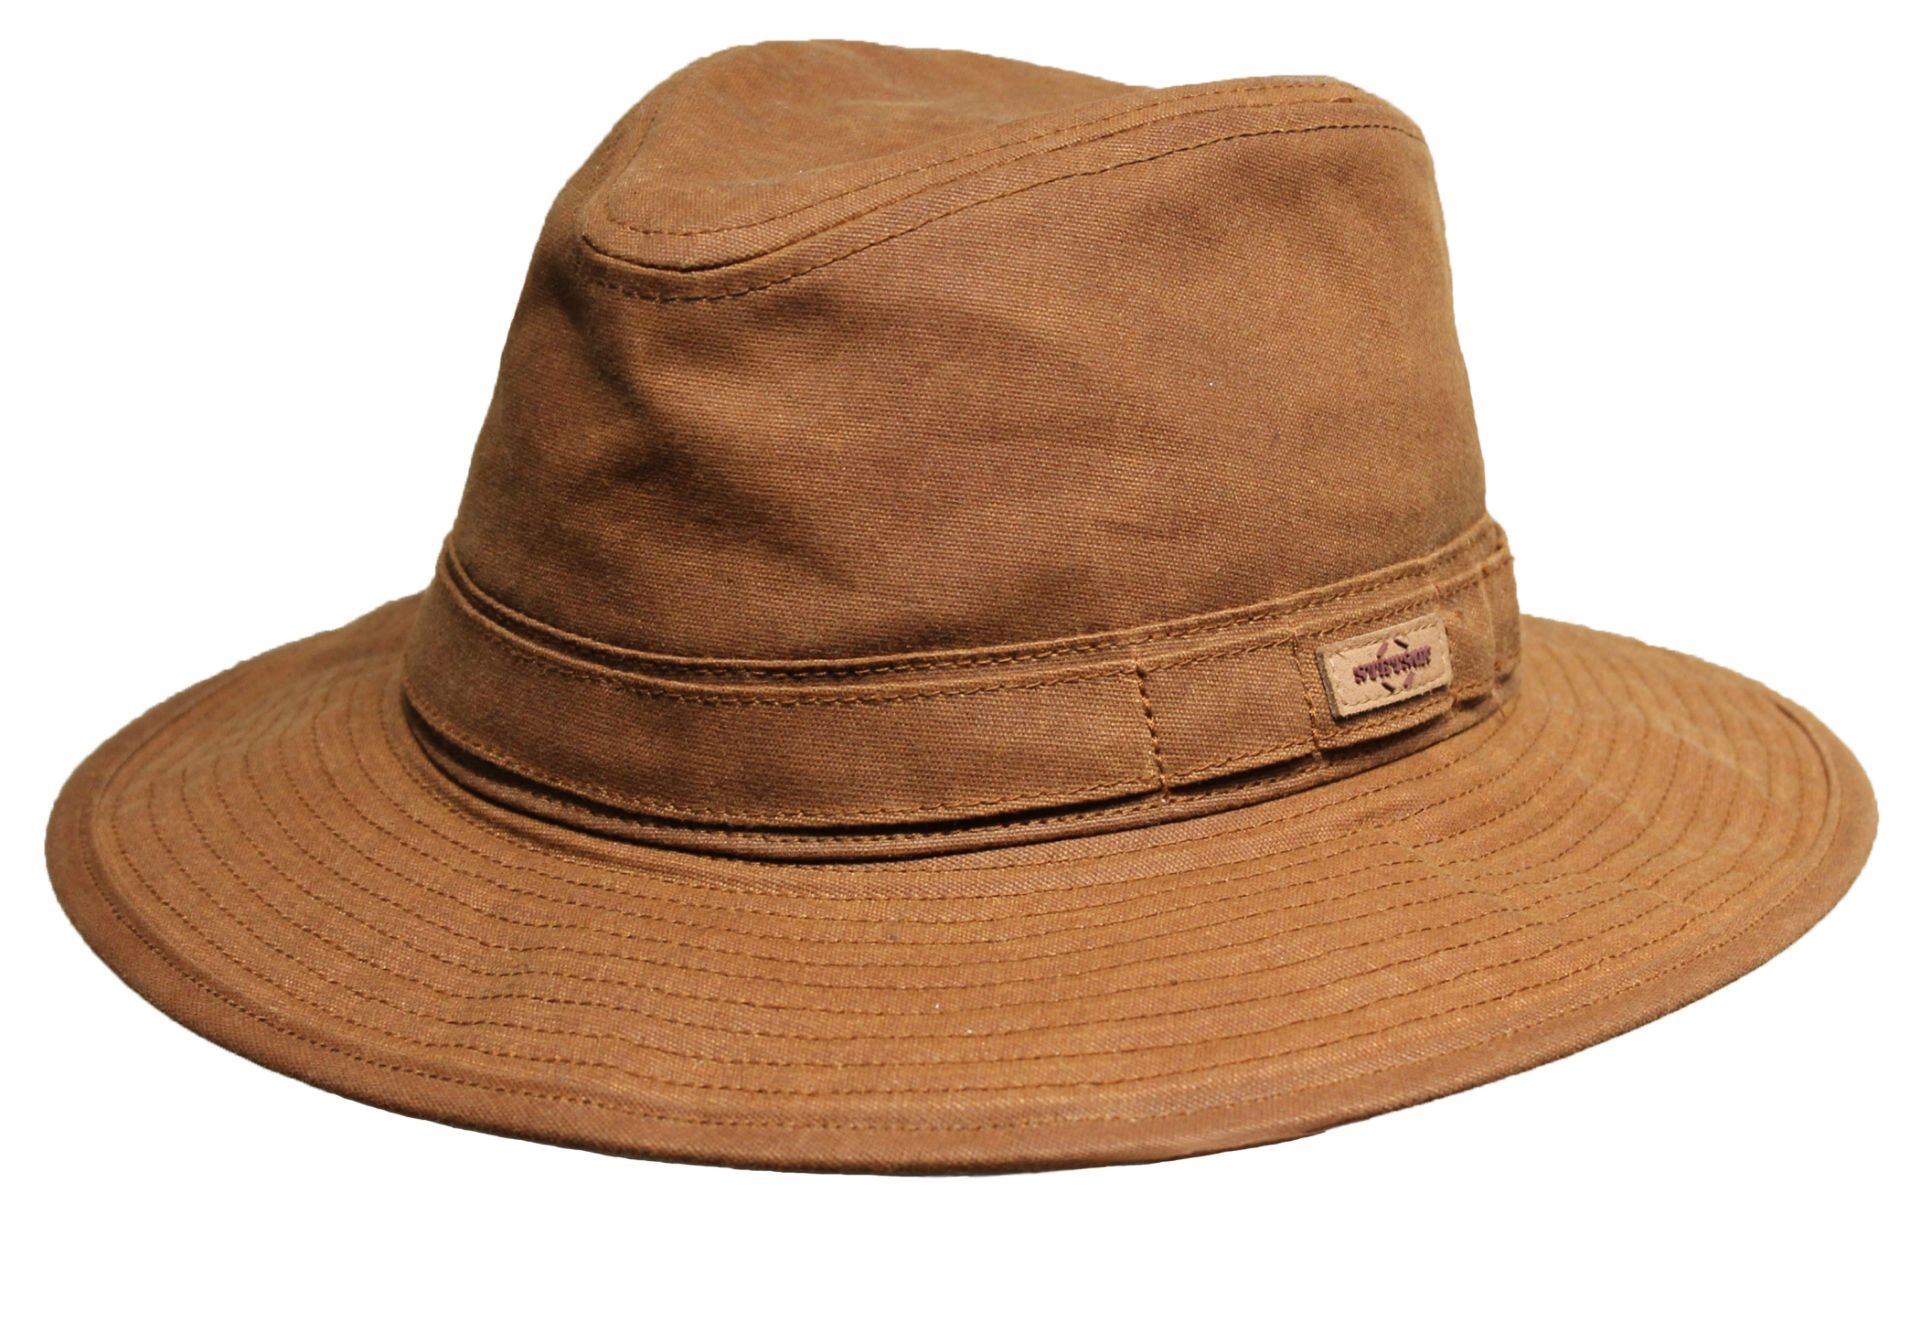 Picture for category Outdoor hats